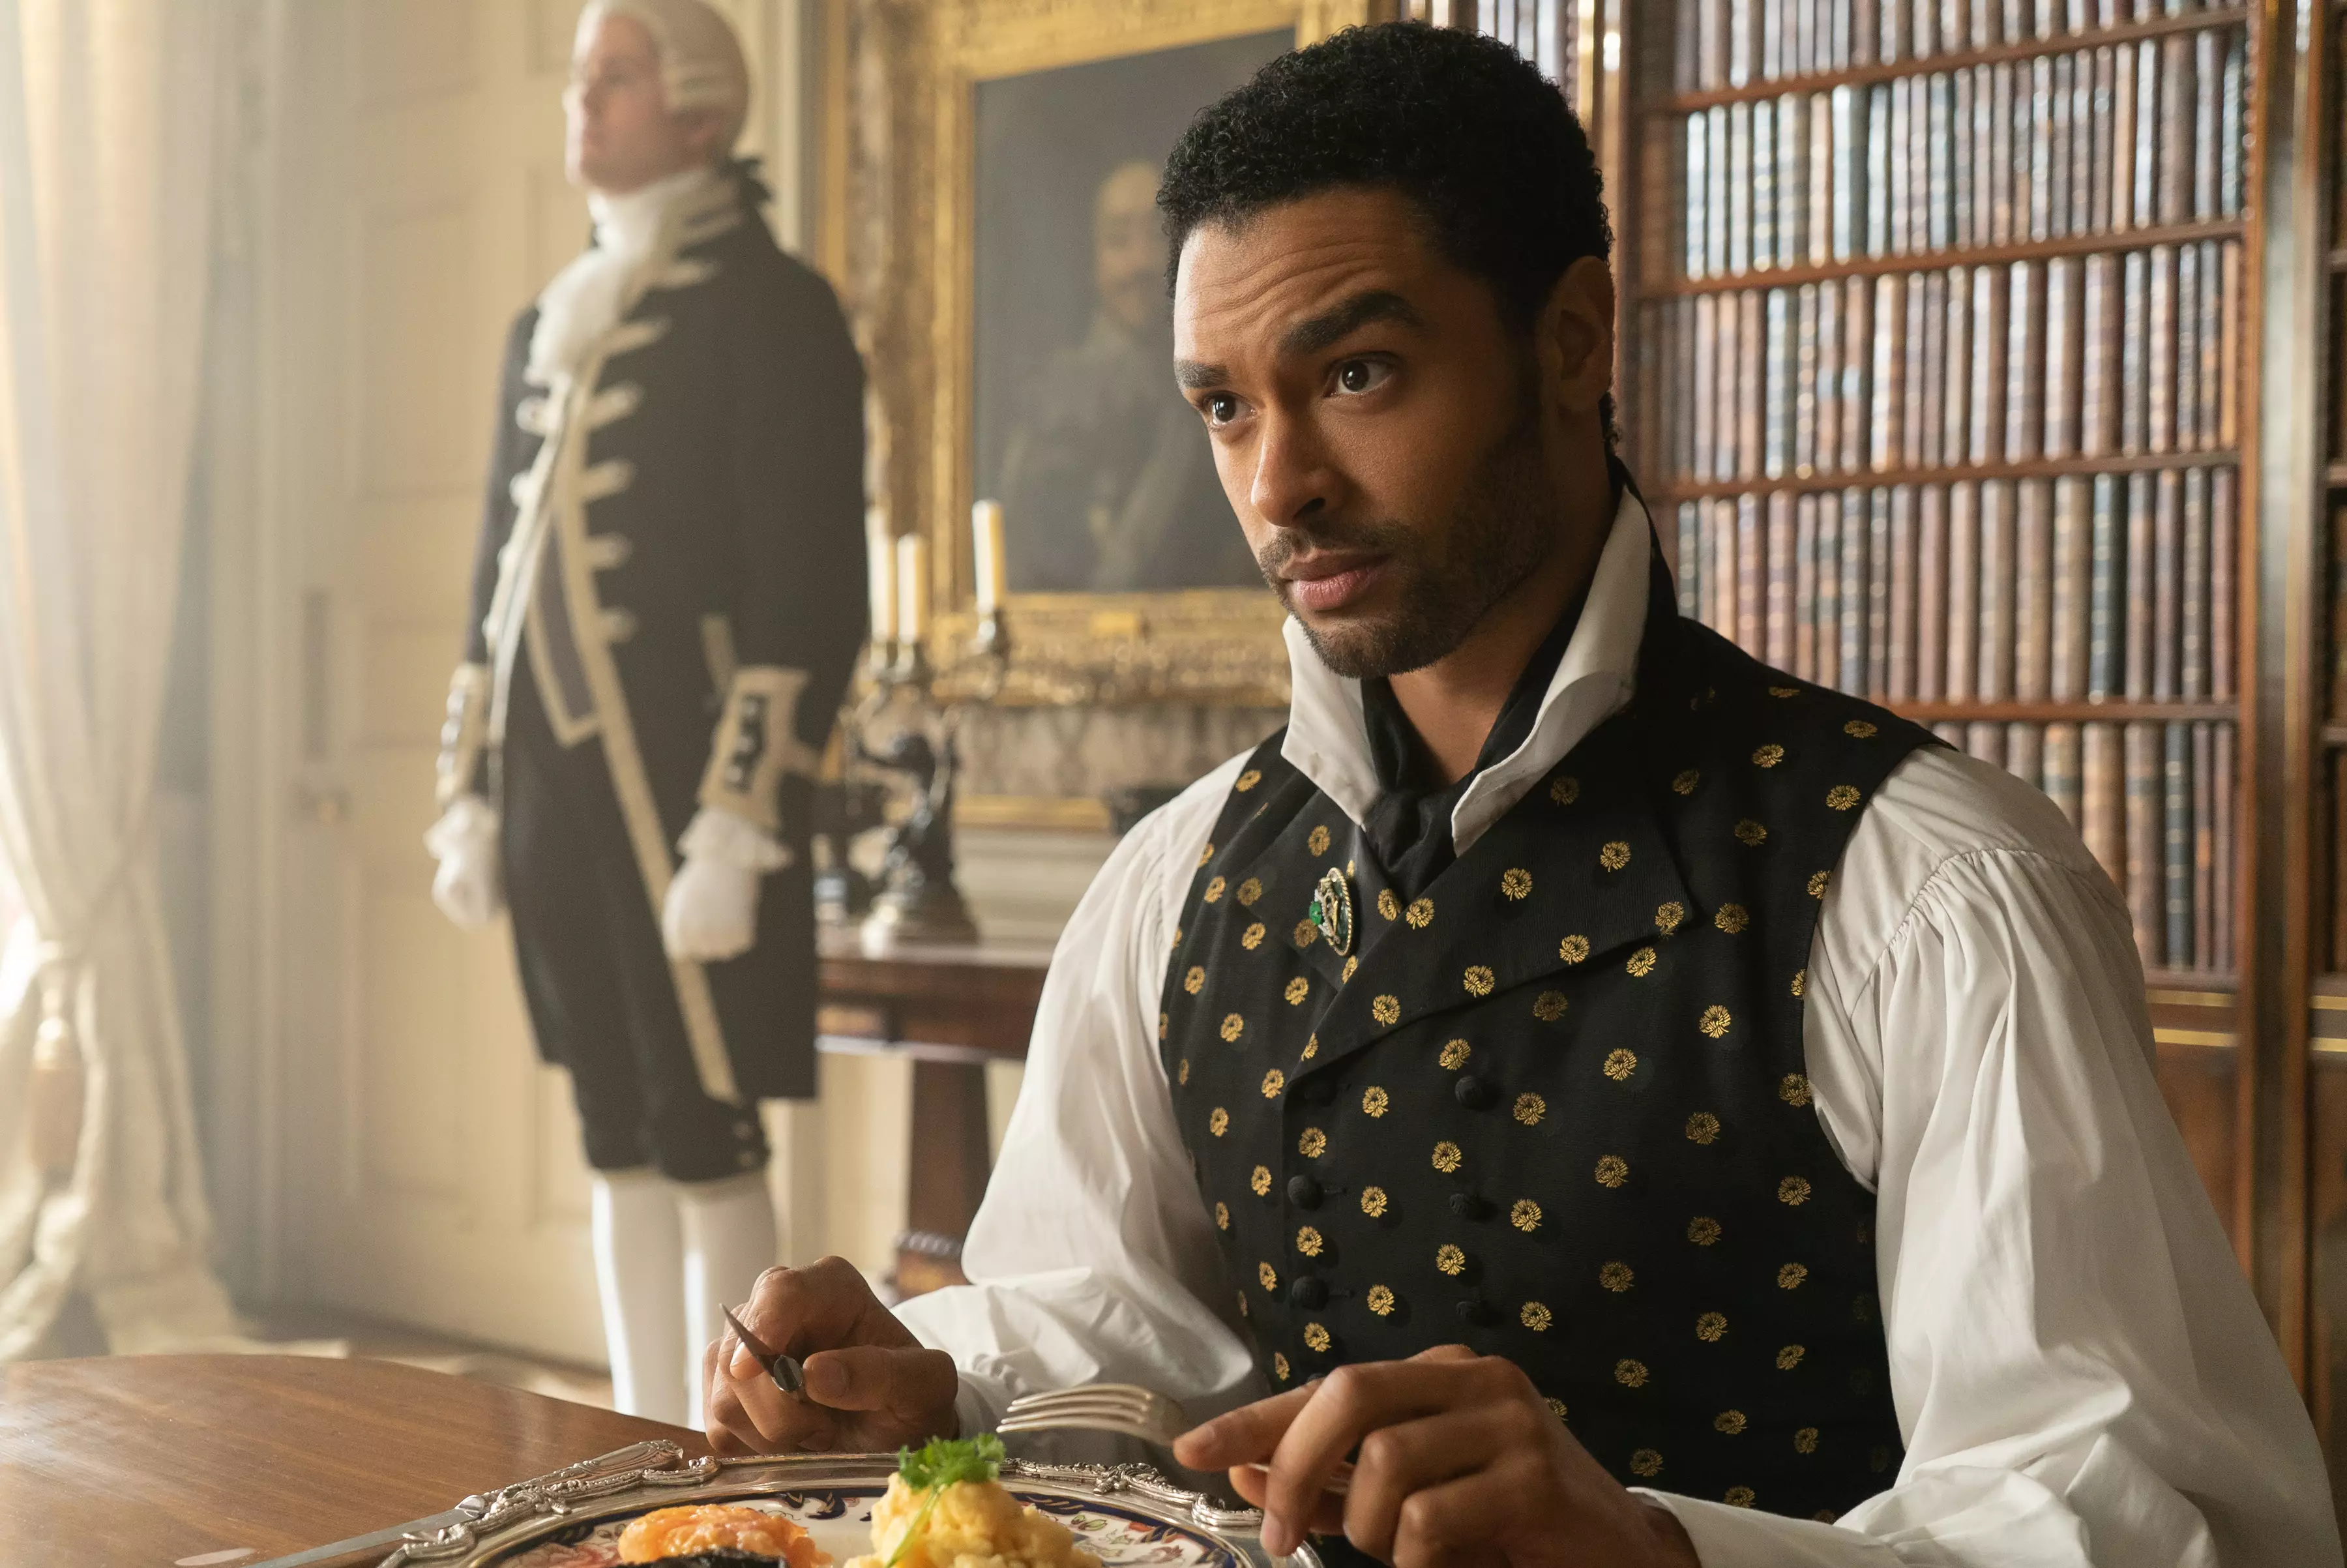 It was confirmed that the Duke played by Regé-Jean Page will not return for the second season which is currently filming (